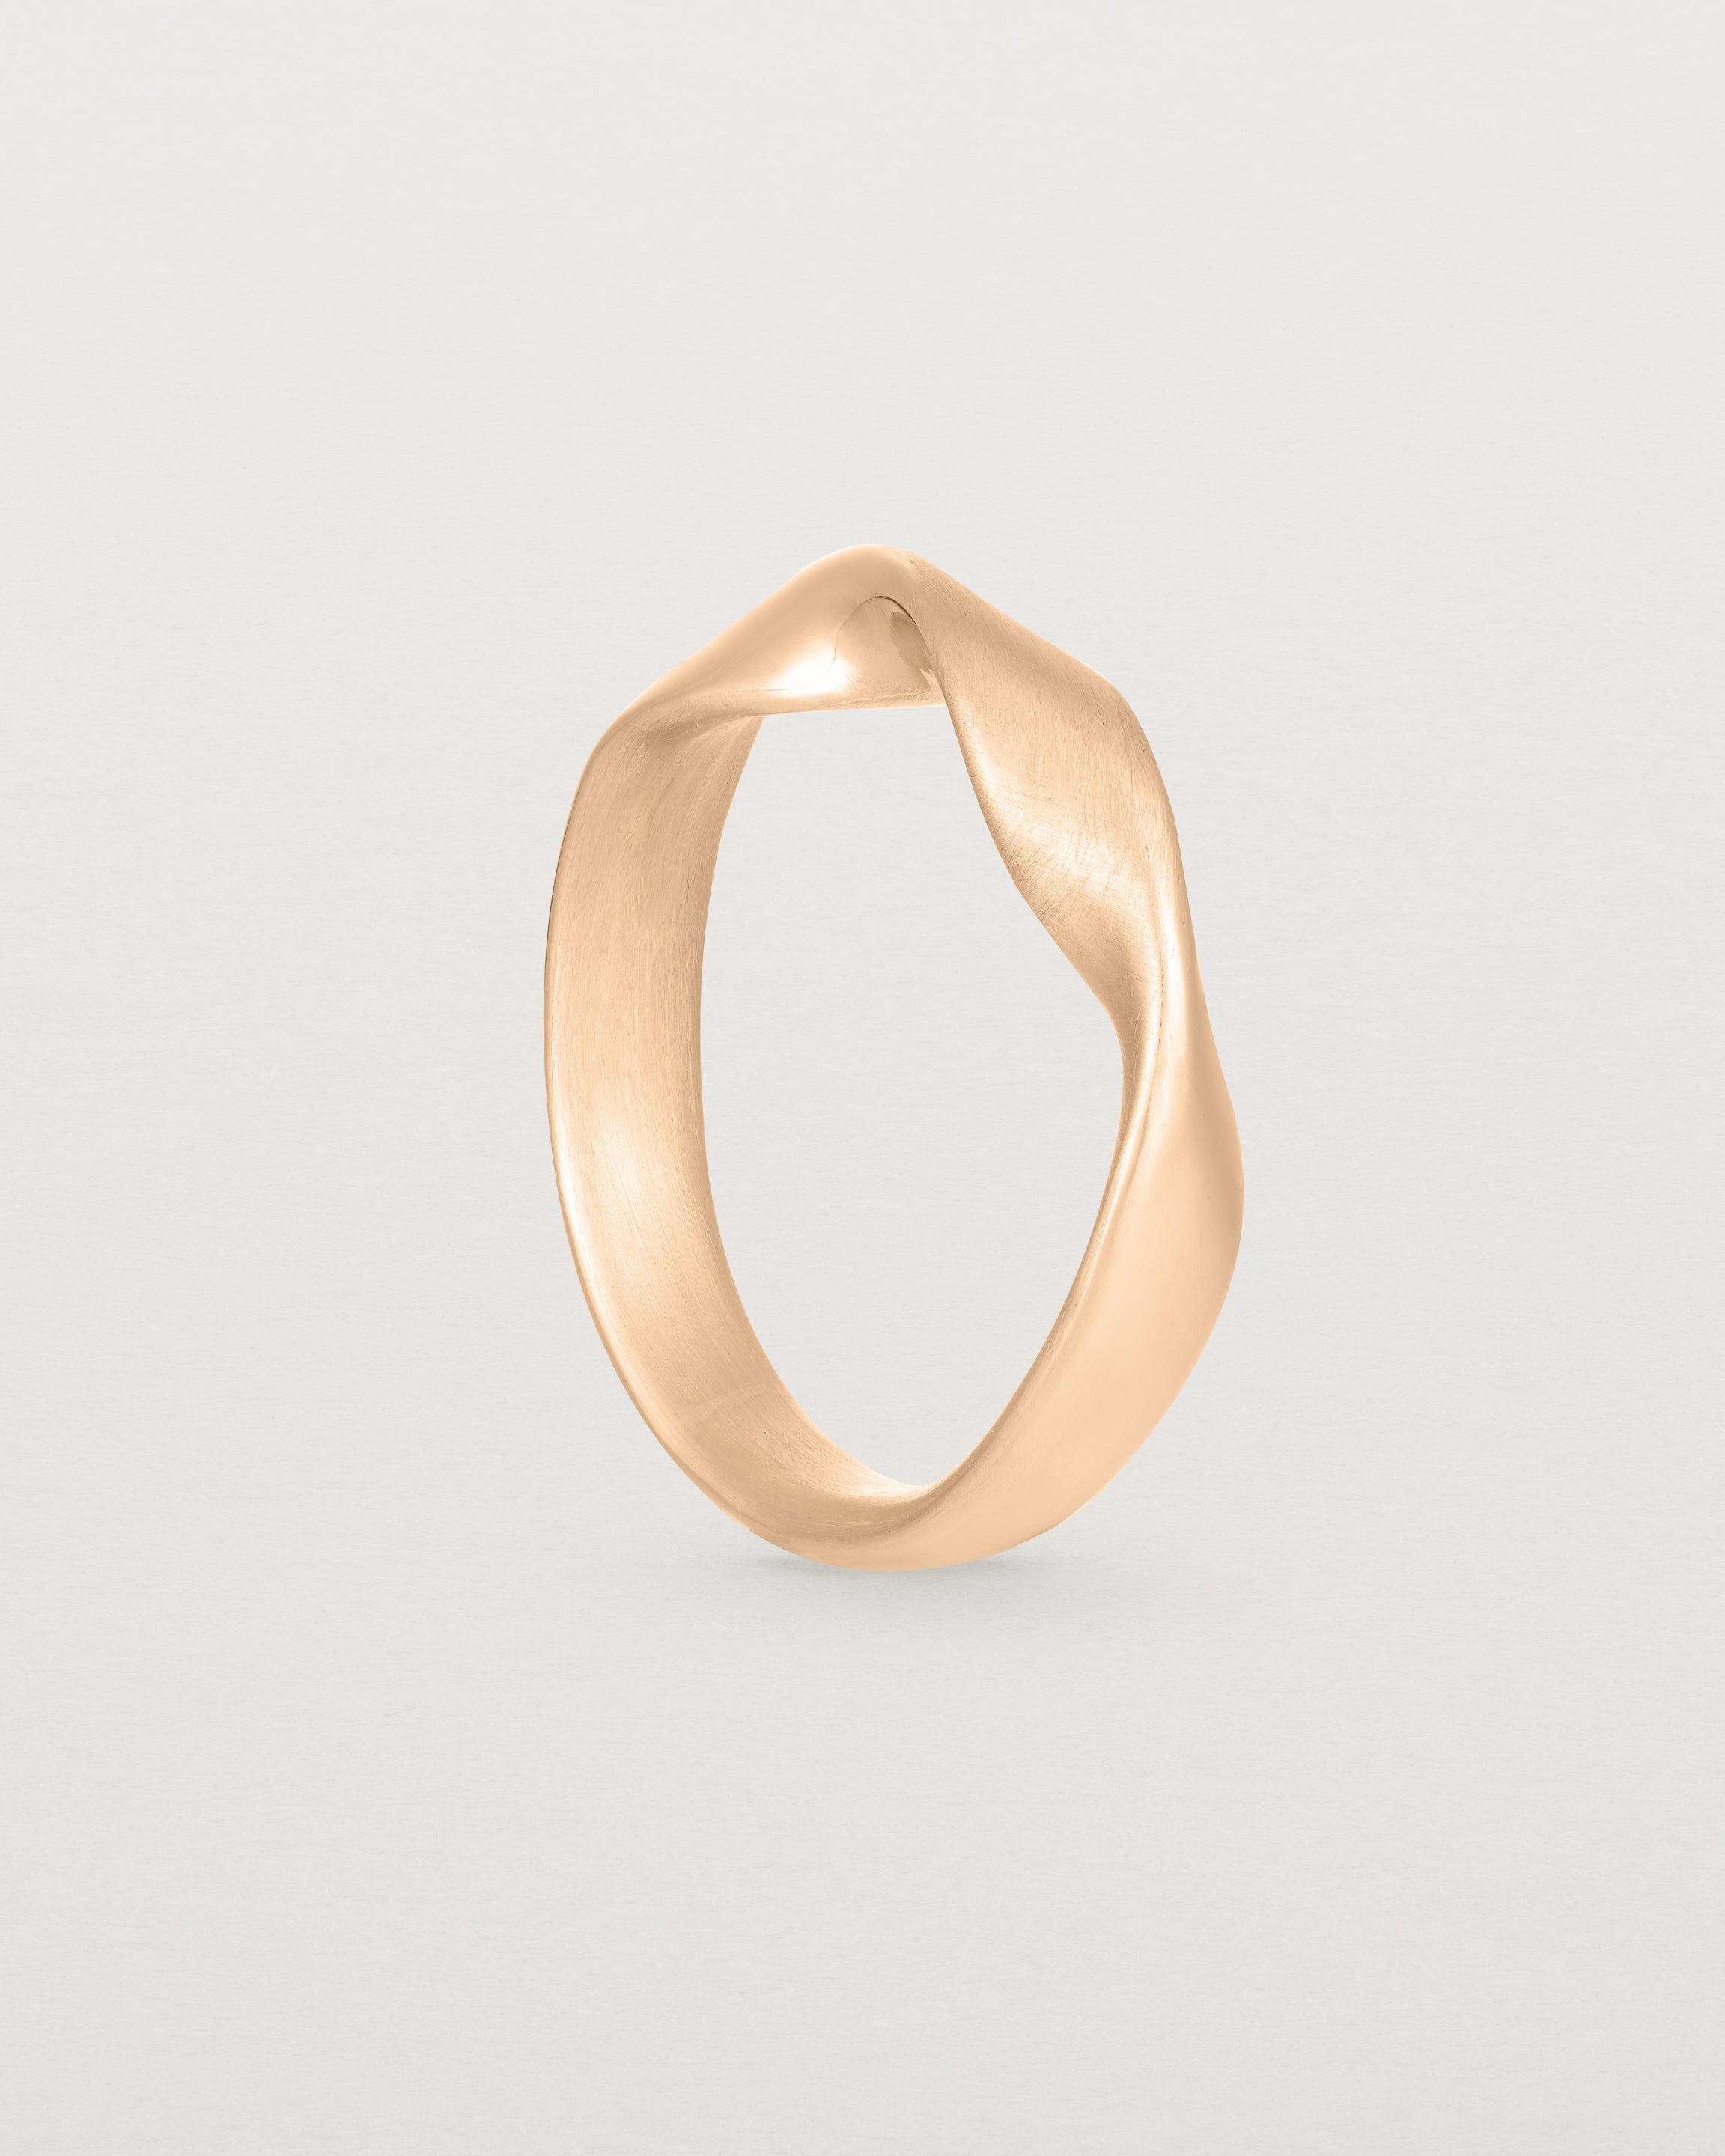 Standing view of the Ellipse / Shift Ring in Rose Gold.